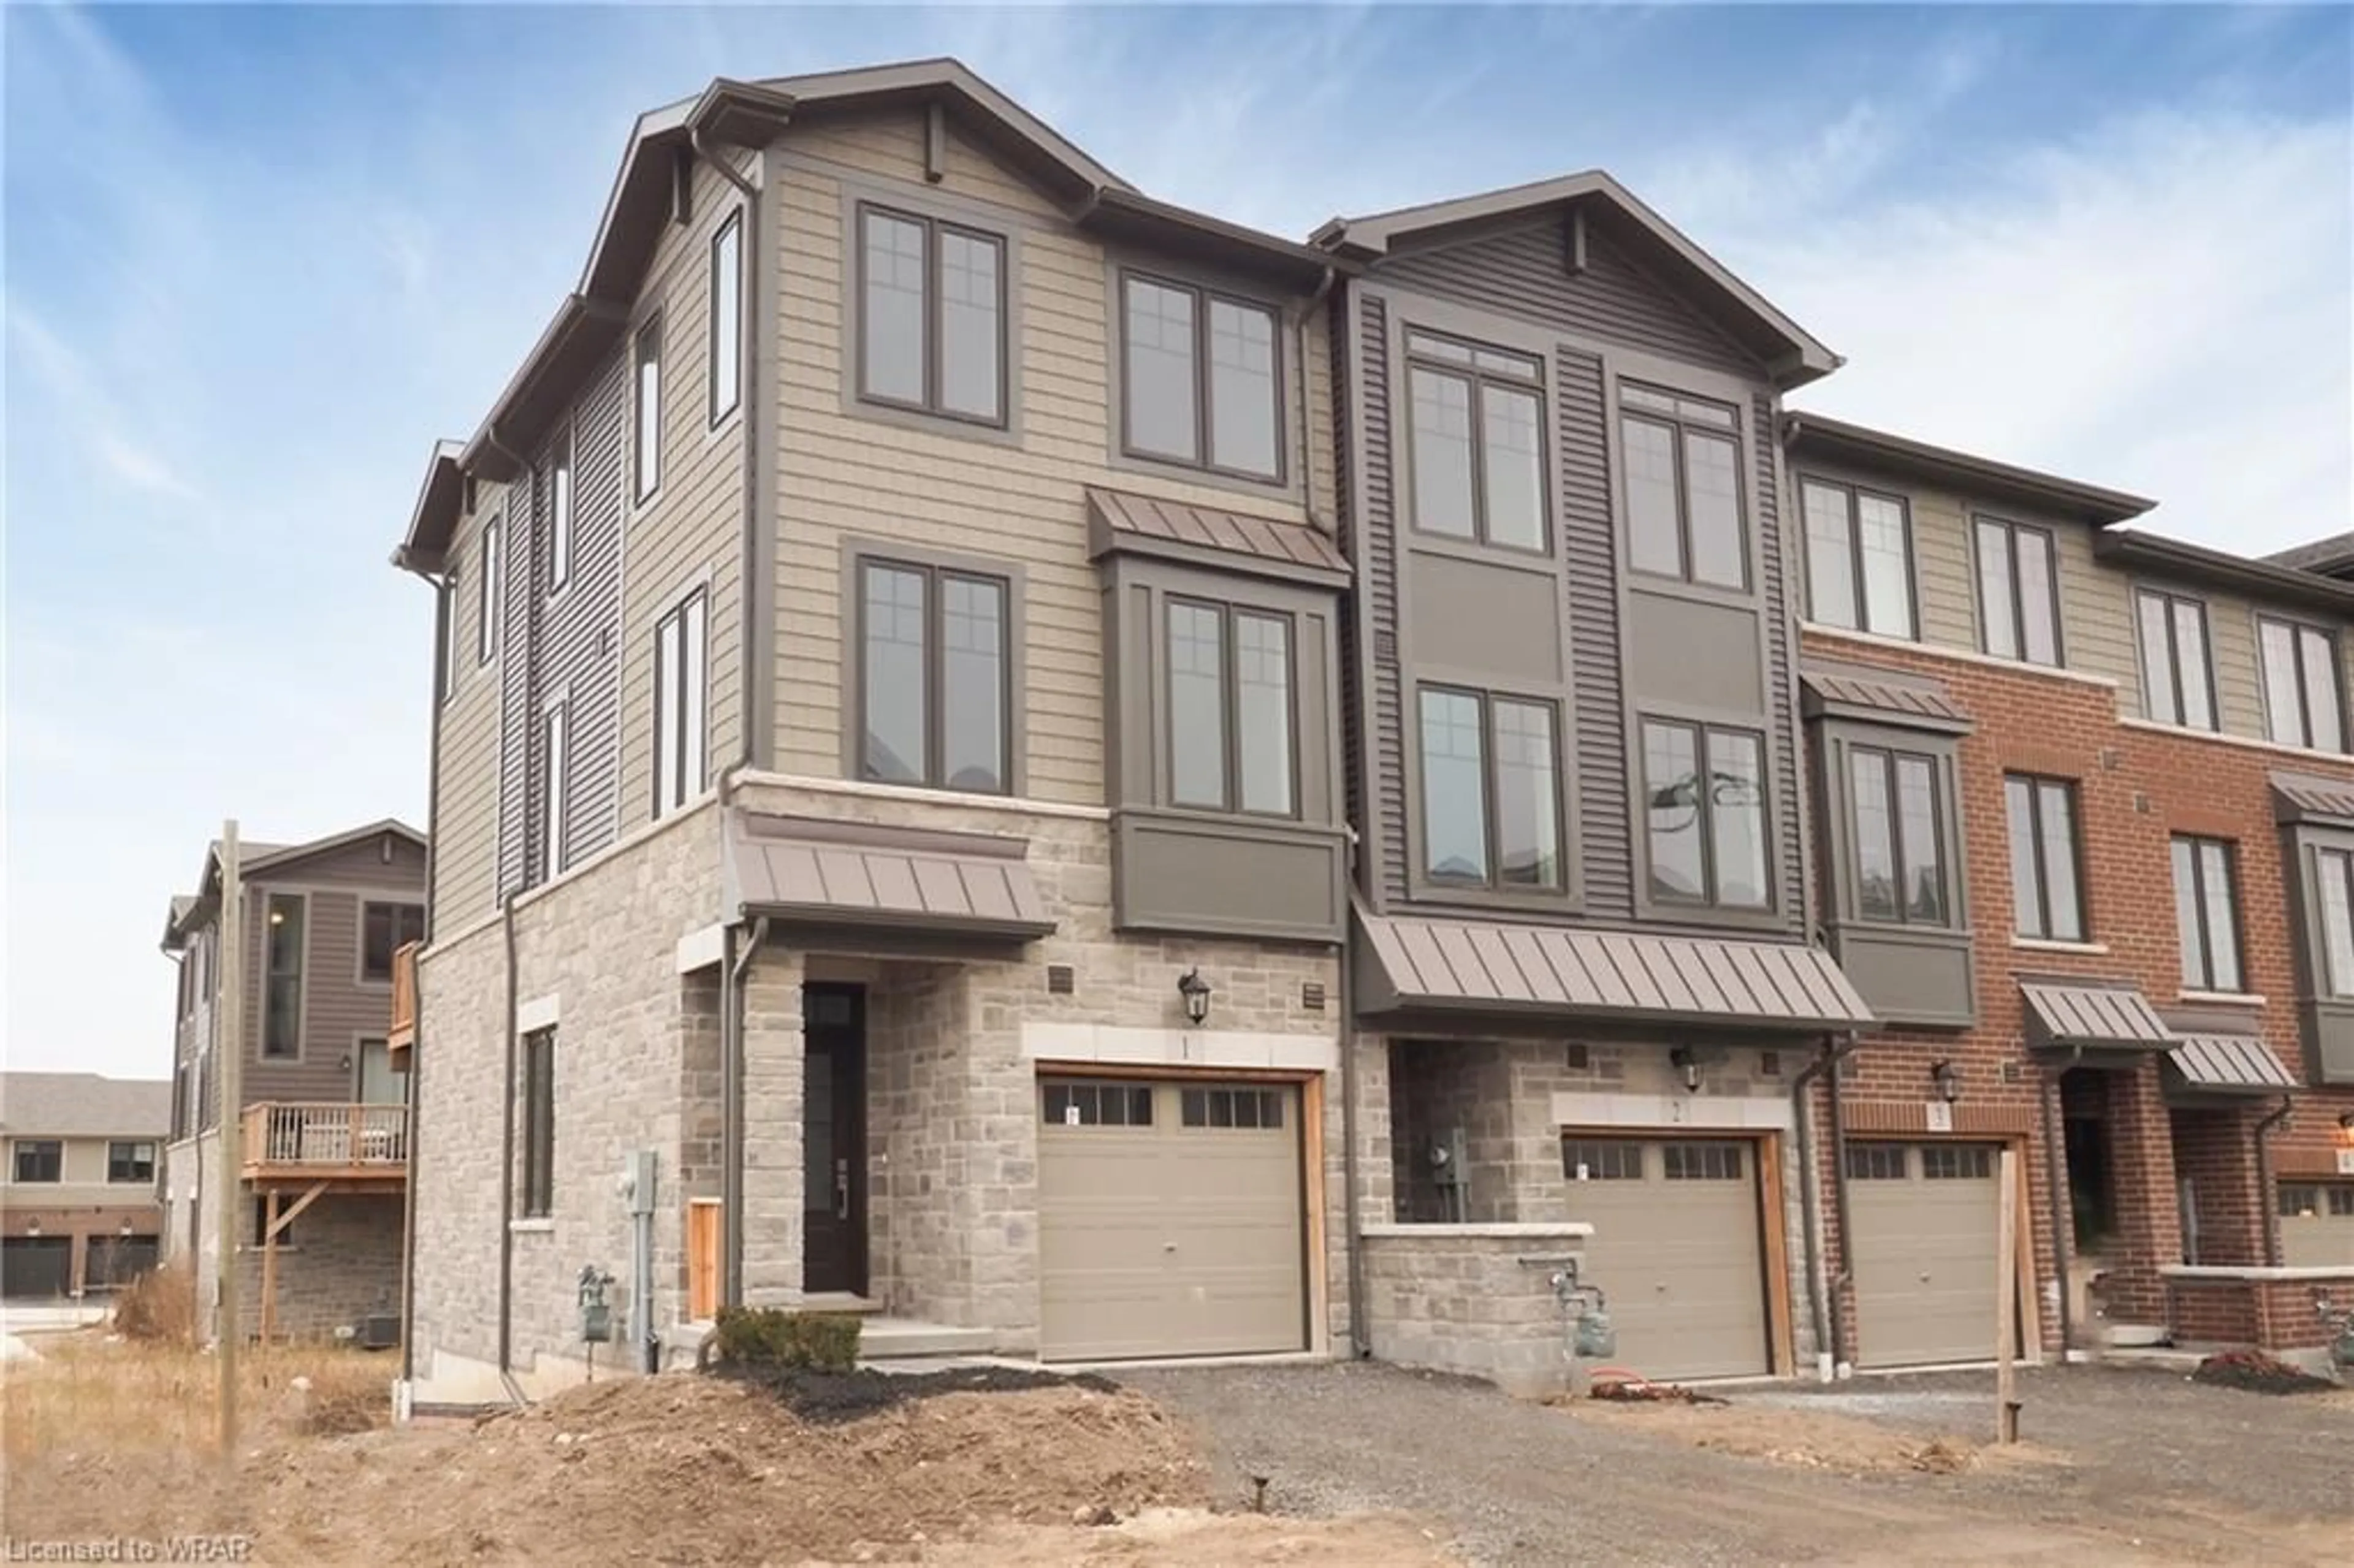 Home with stone exterior material for 10 Birmingham Dr #1, Cambridge Ontario N1R 8J8